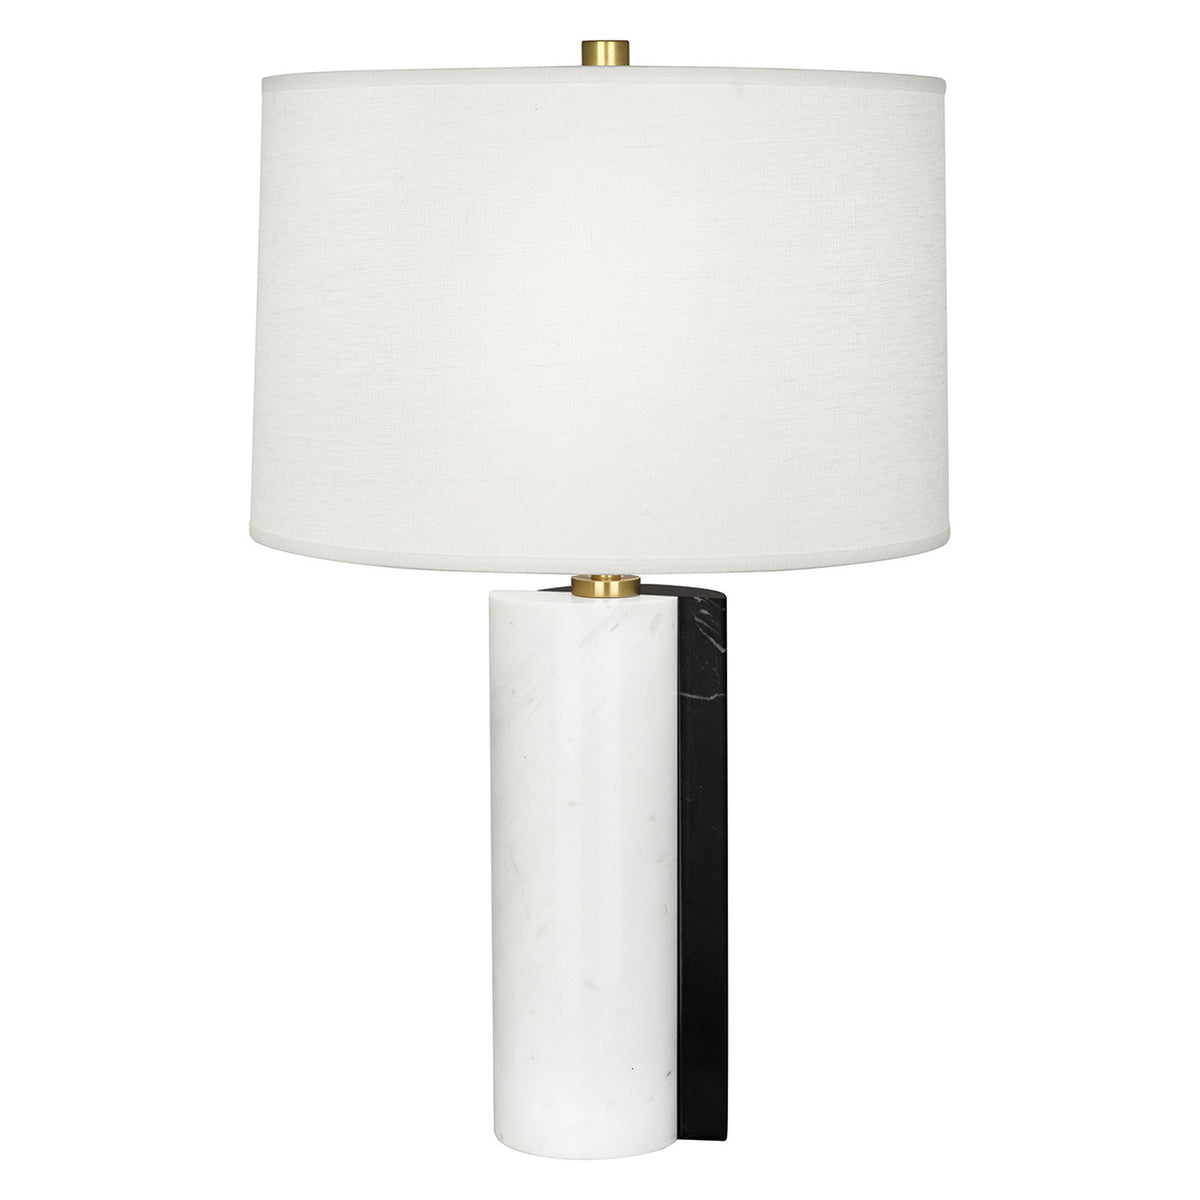 Canaan Shift Table Lamp by Jonathan Adler